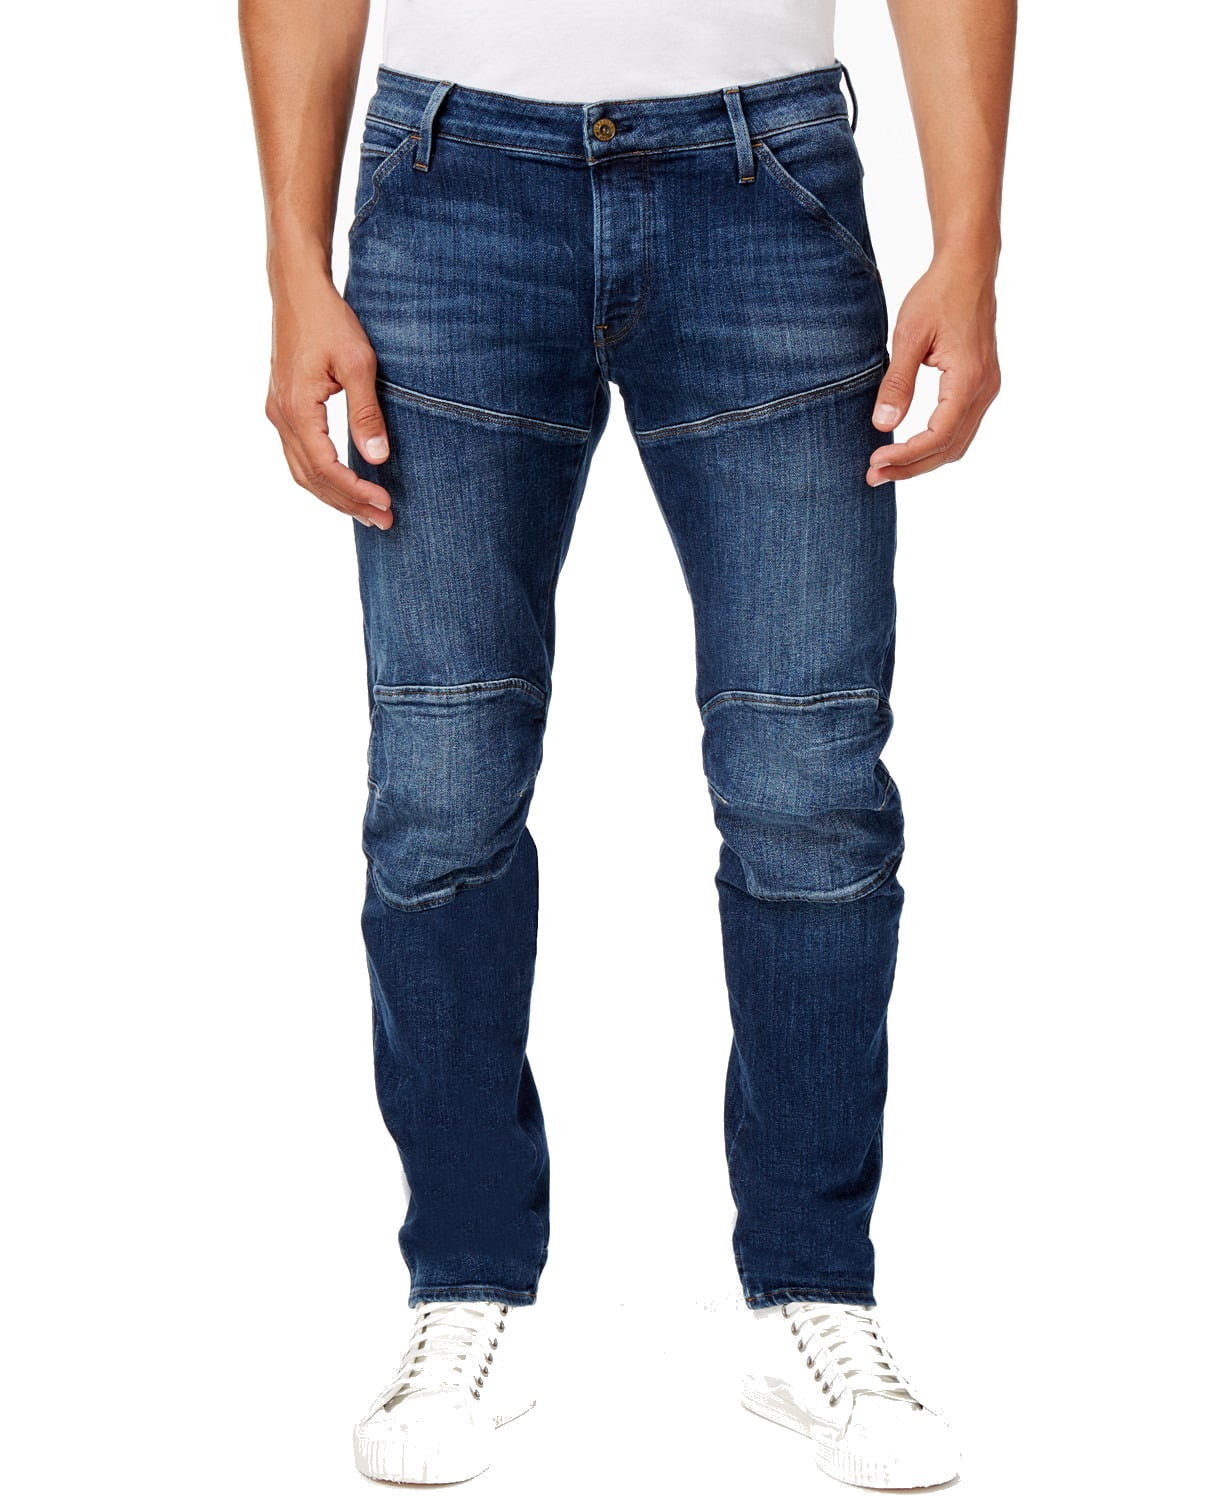 G-star - Men Jeans 33x32 Tapered Slim Deconstructed Stretch 33 ...